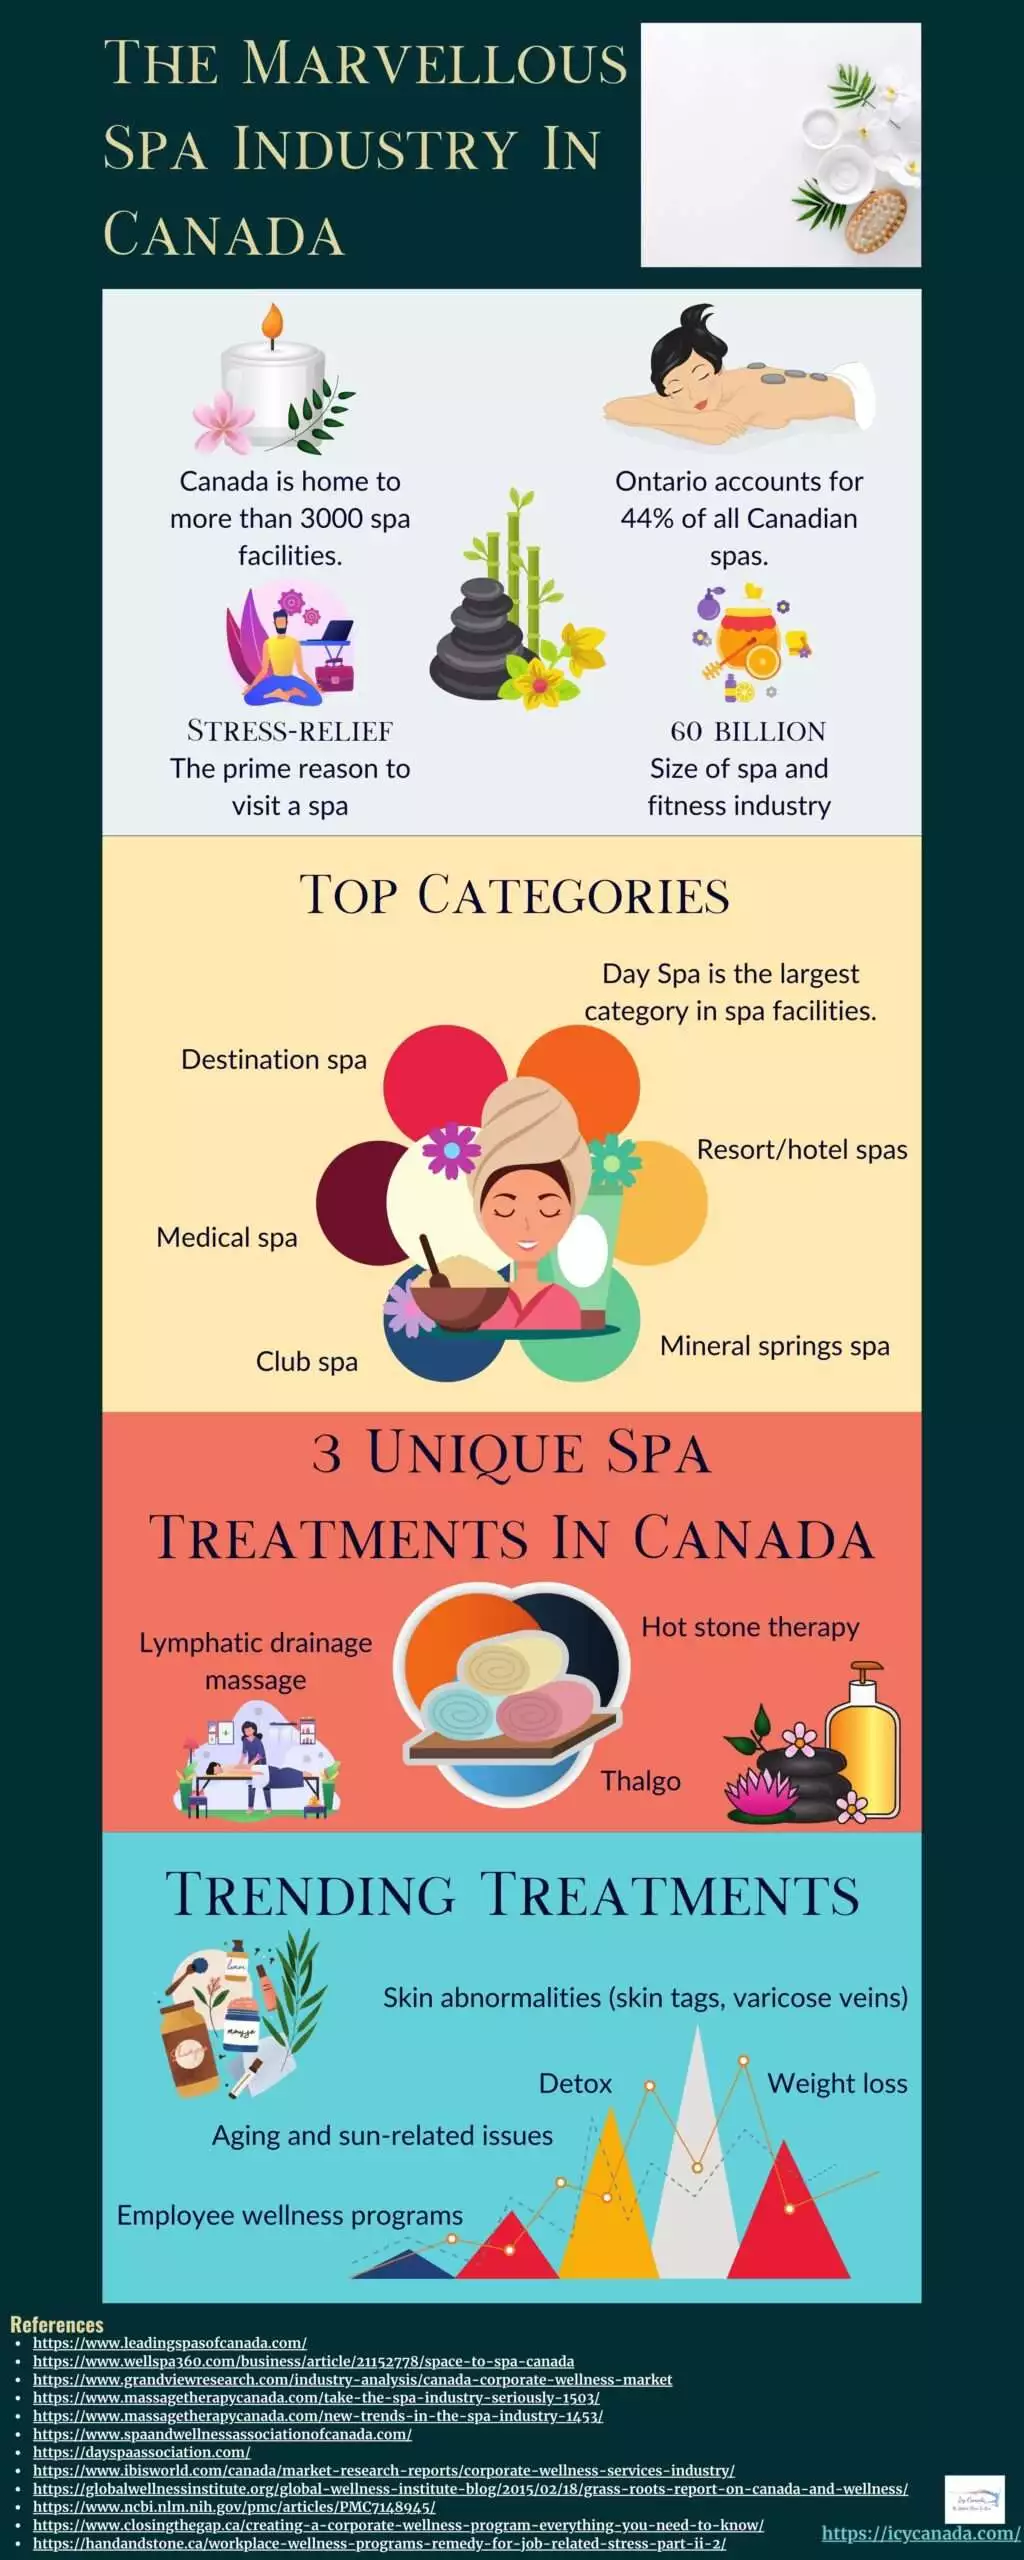 The Marvellous Spa Industry In Canada